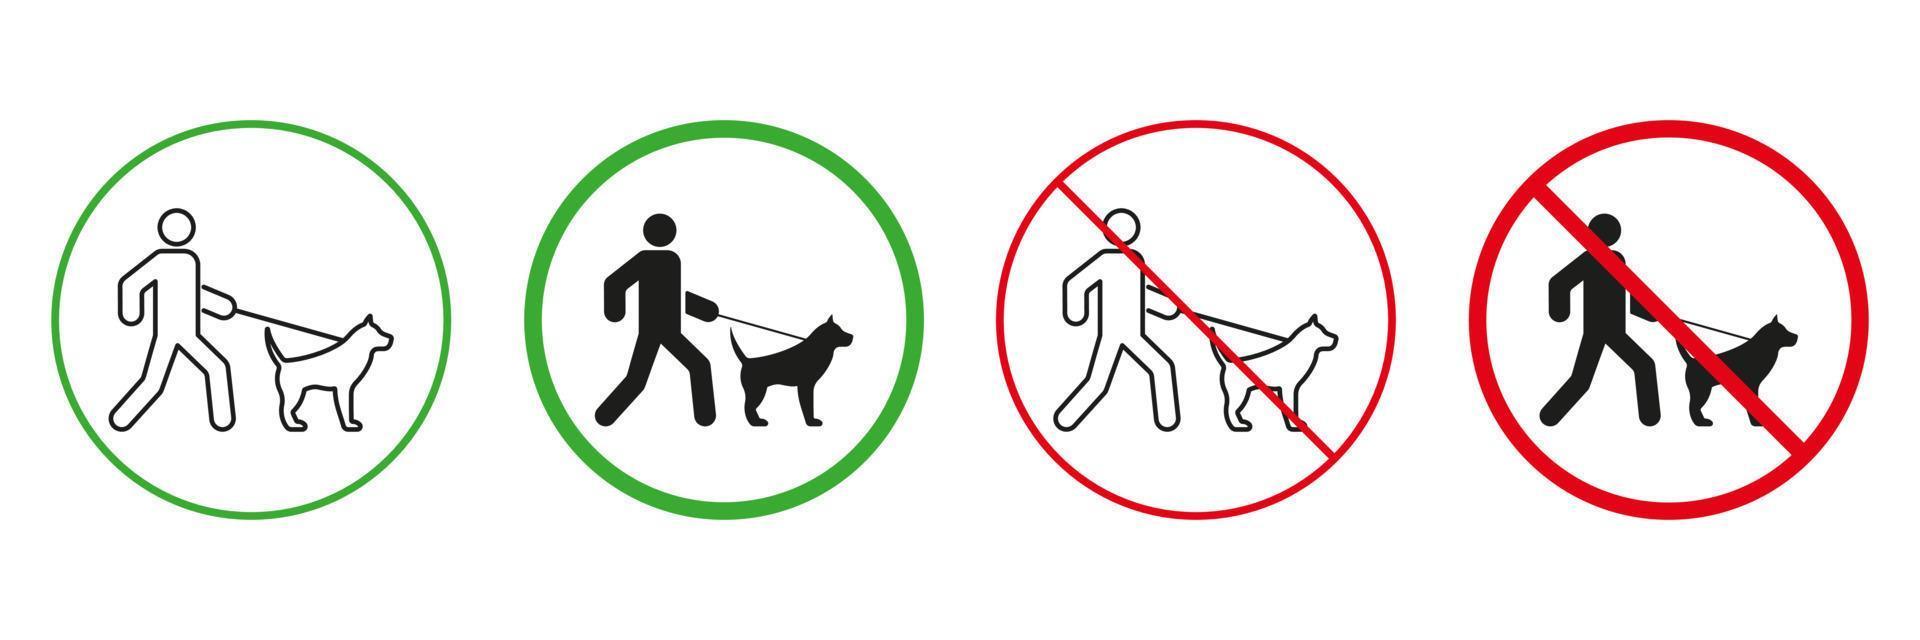 Zone for Walking Dog Red and Green Warning Signs. Male and Pet on Leash Walk Line and Silhouette Icons Set. Allowed and Prohibited Walk Animal Area Pictogram. Isolated Vector Illustration.